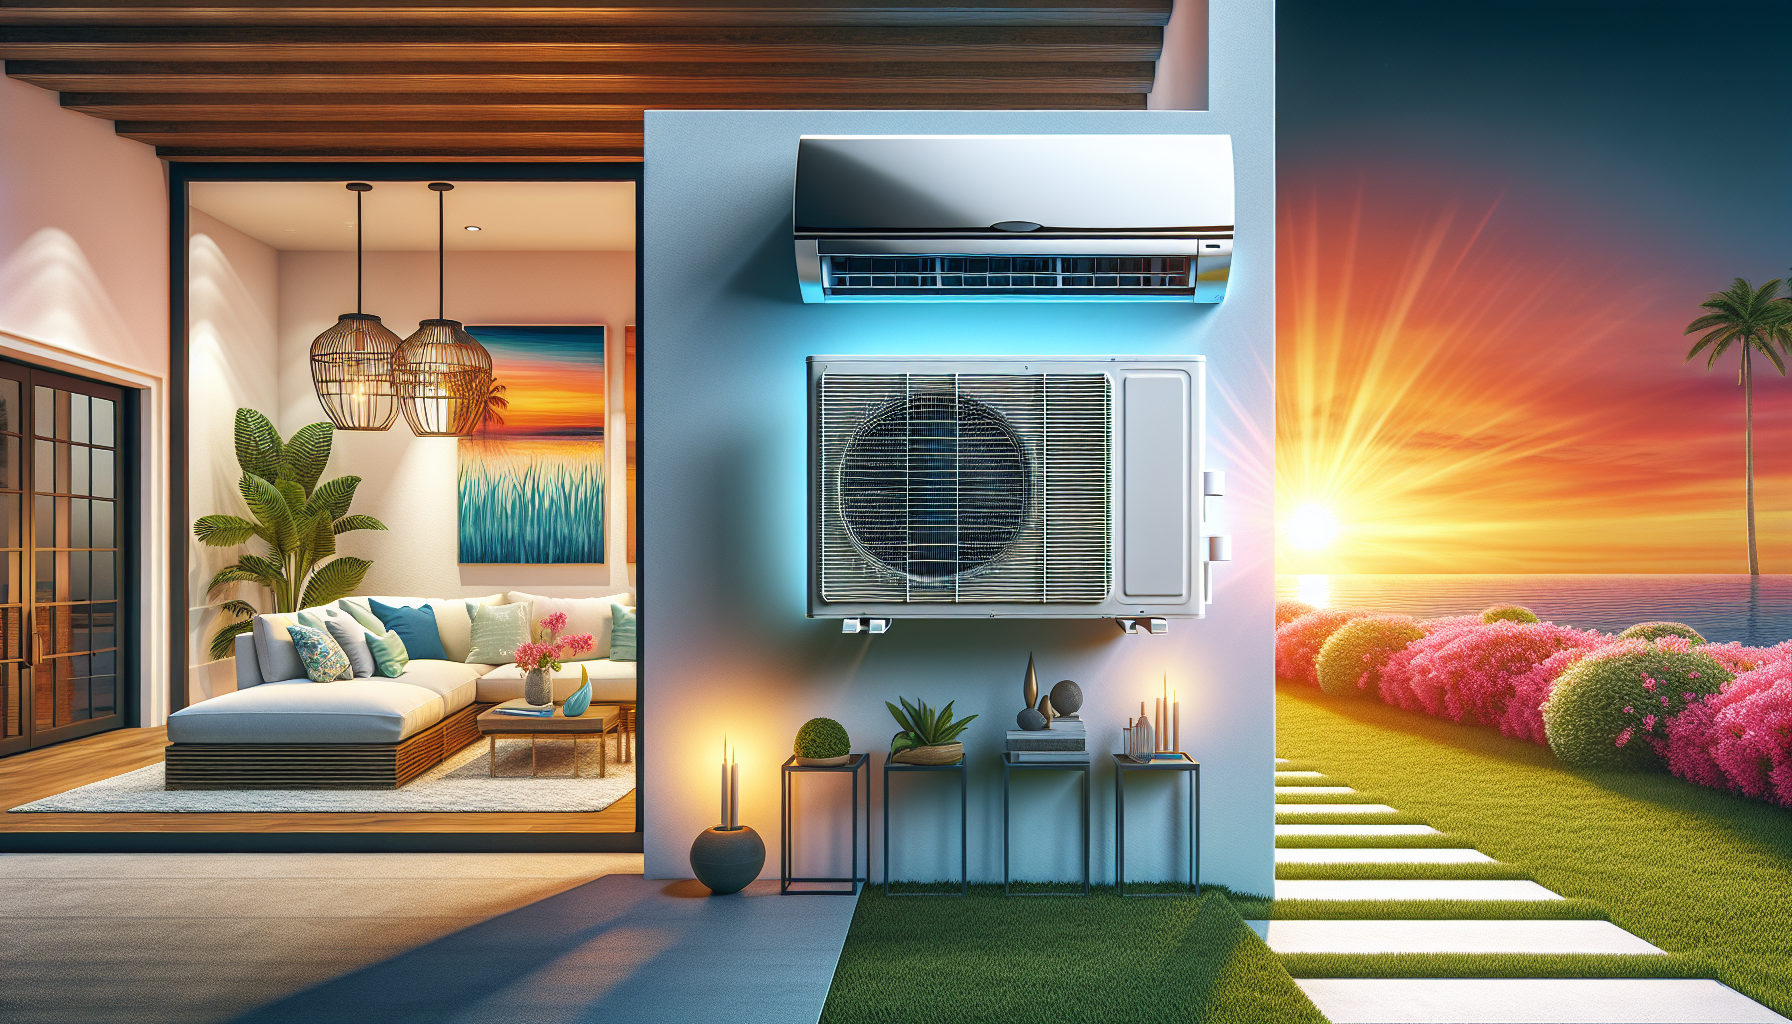 Illustration of a modern air conditioning unit in a Florida home